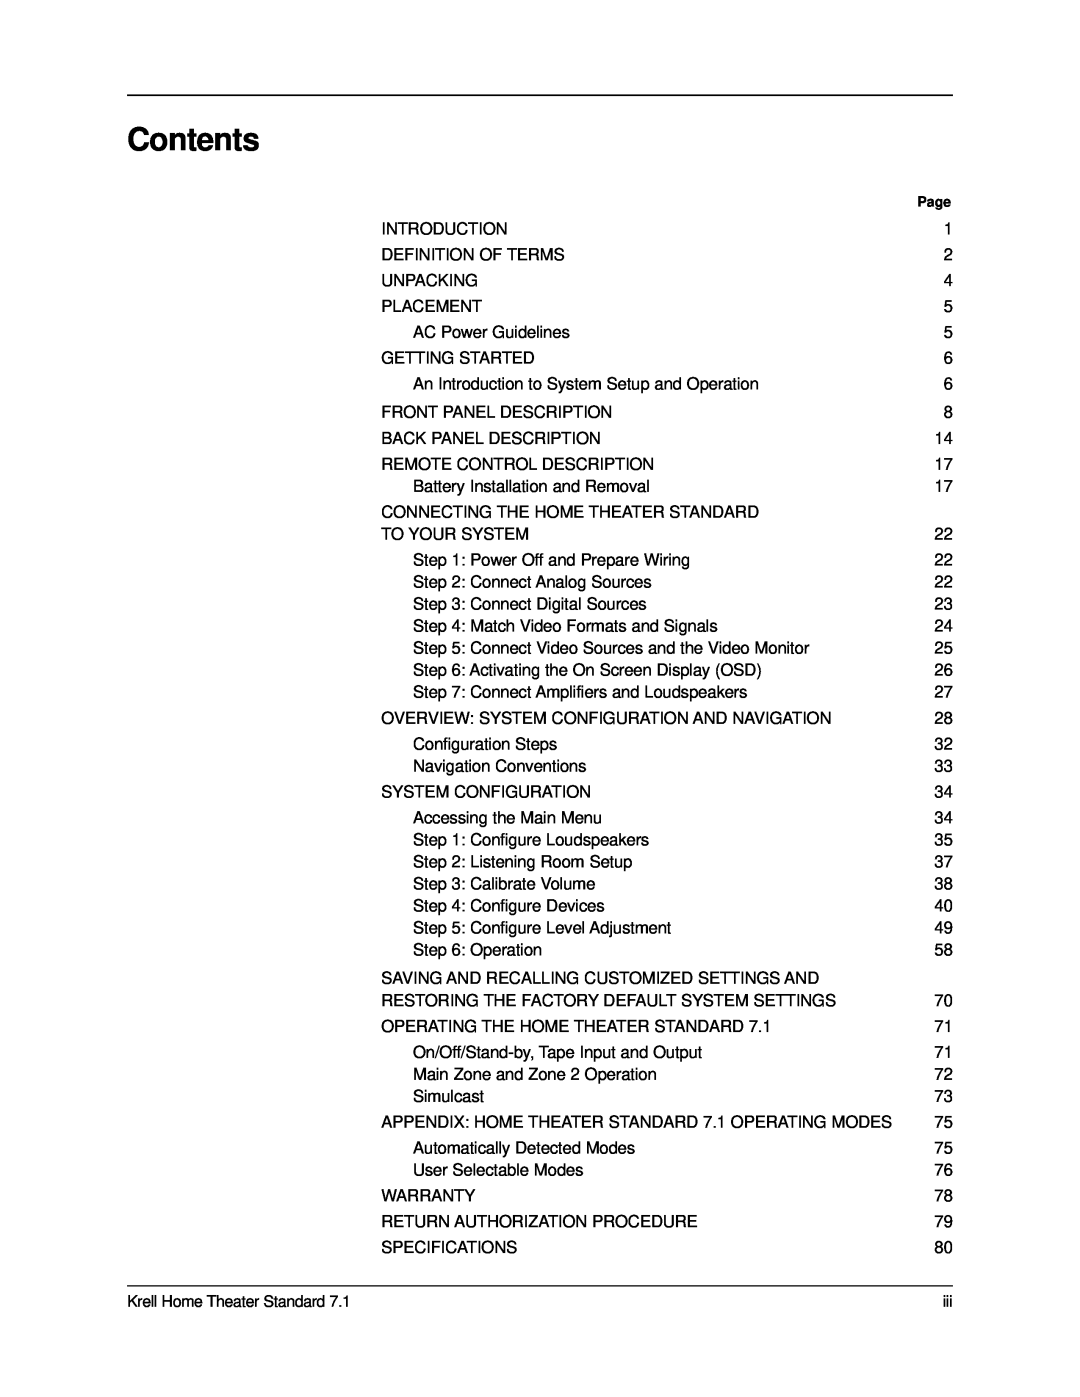 Krell Industries 7.1 manual Contents 